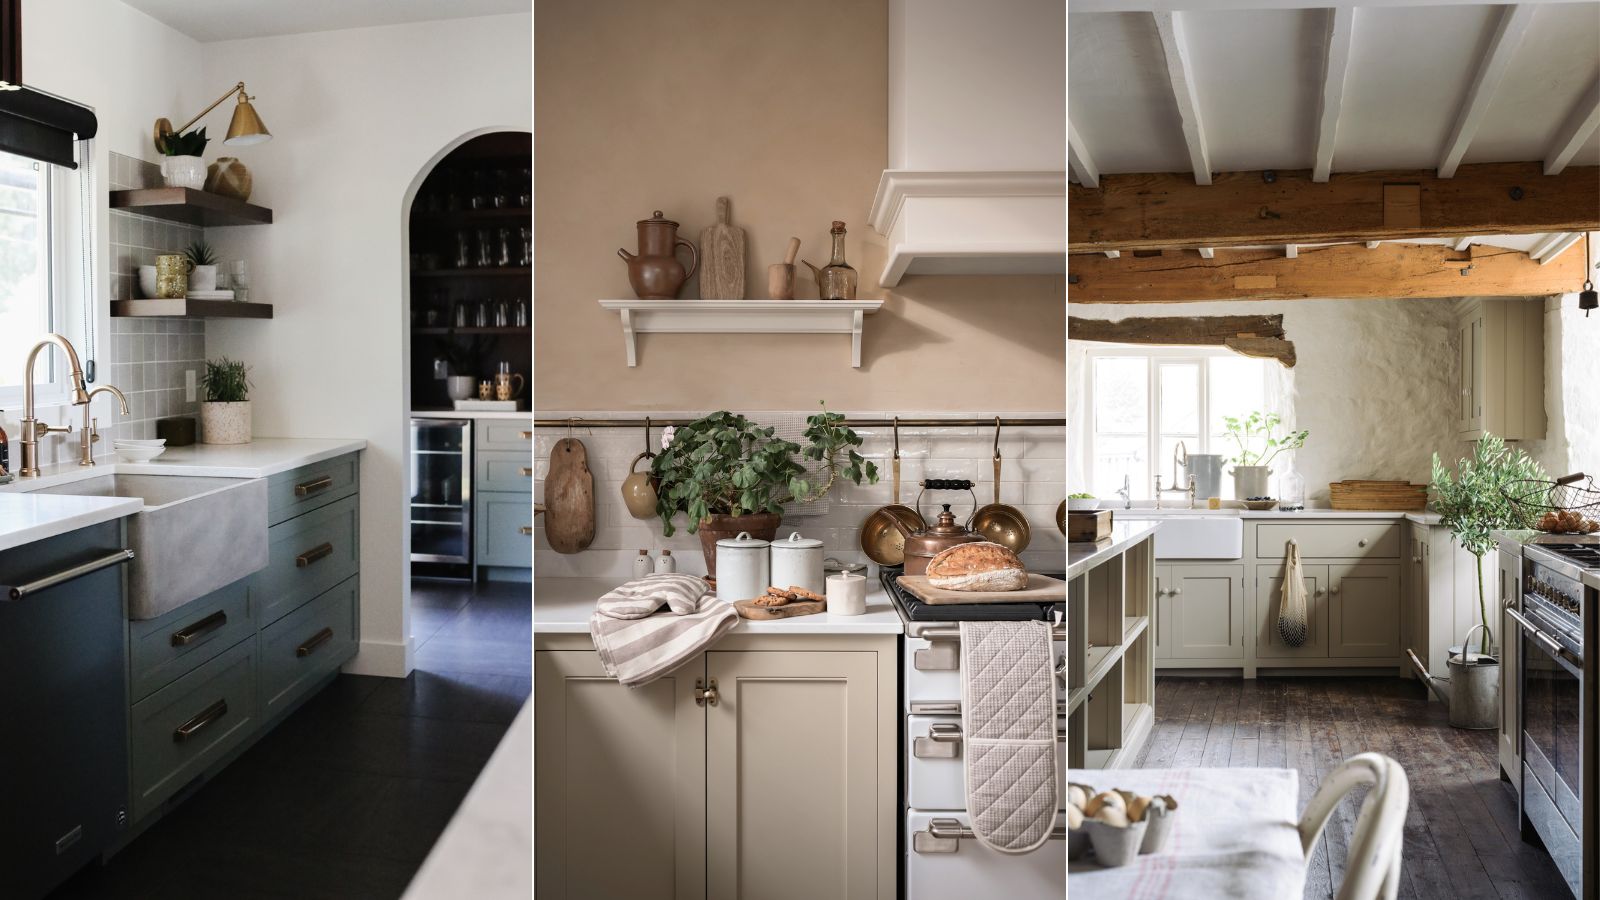 Small modern farmhouse kitchen ideas – 7 ways to get this classic look ...